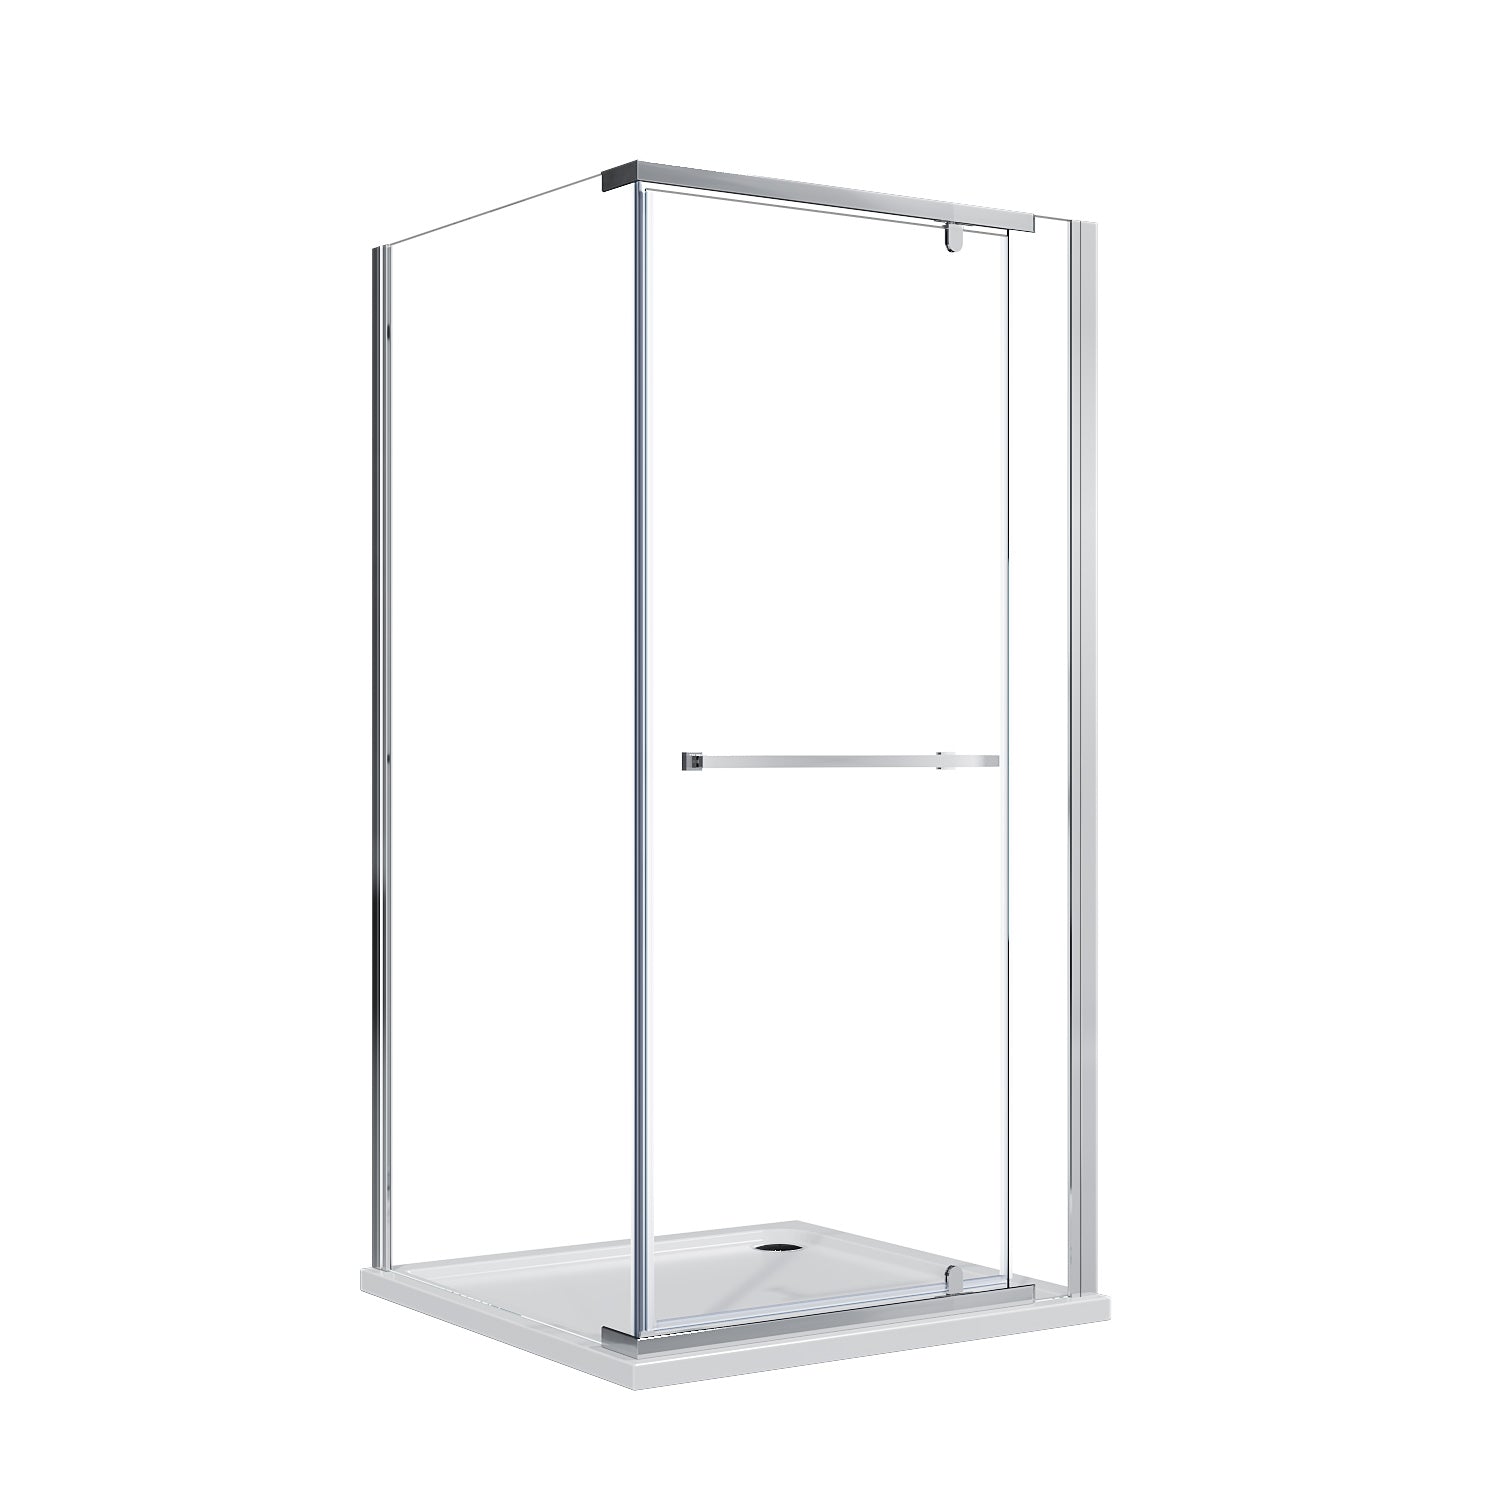 SUNNY SHOWER 36 in. W x 36 in. D x 72 in. H Frameless Chrome Finish Corner Entry Enclosure With Pivot Door - SUNNY SHOWER